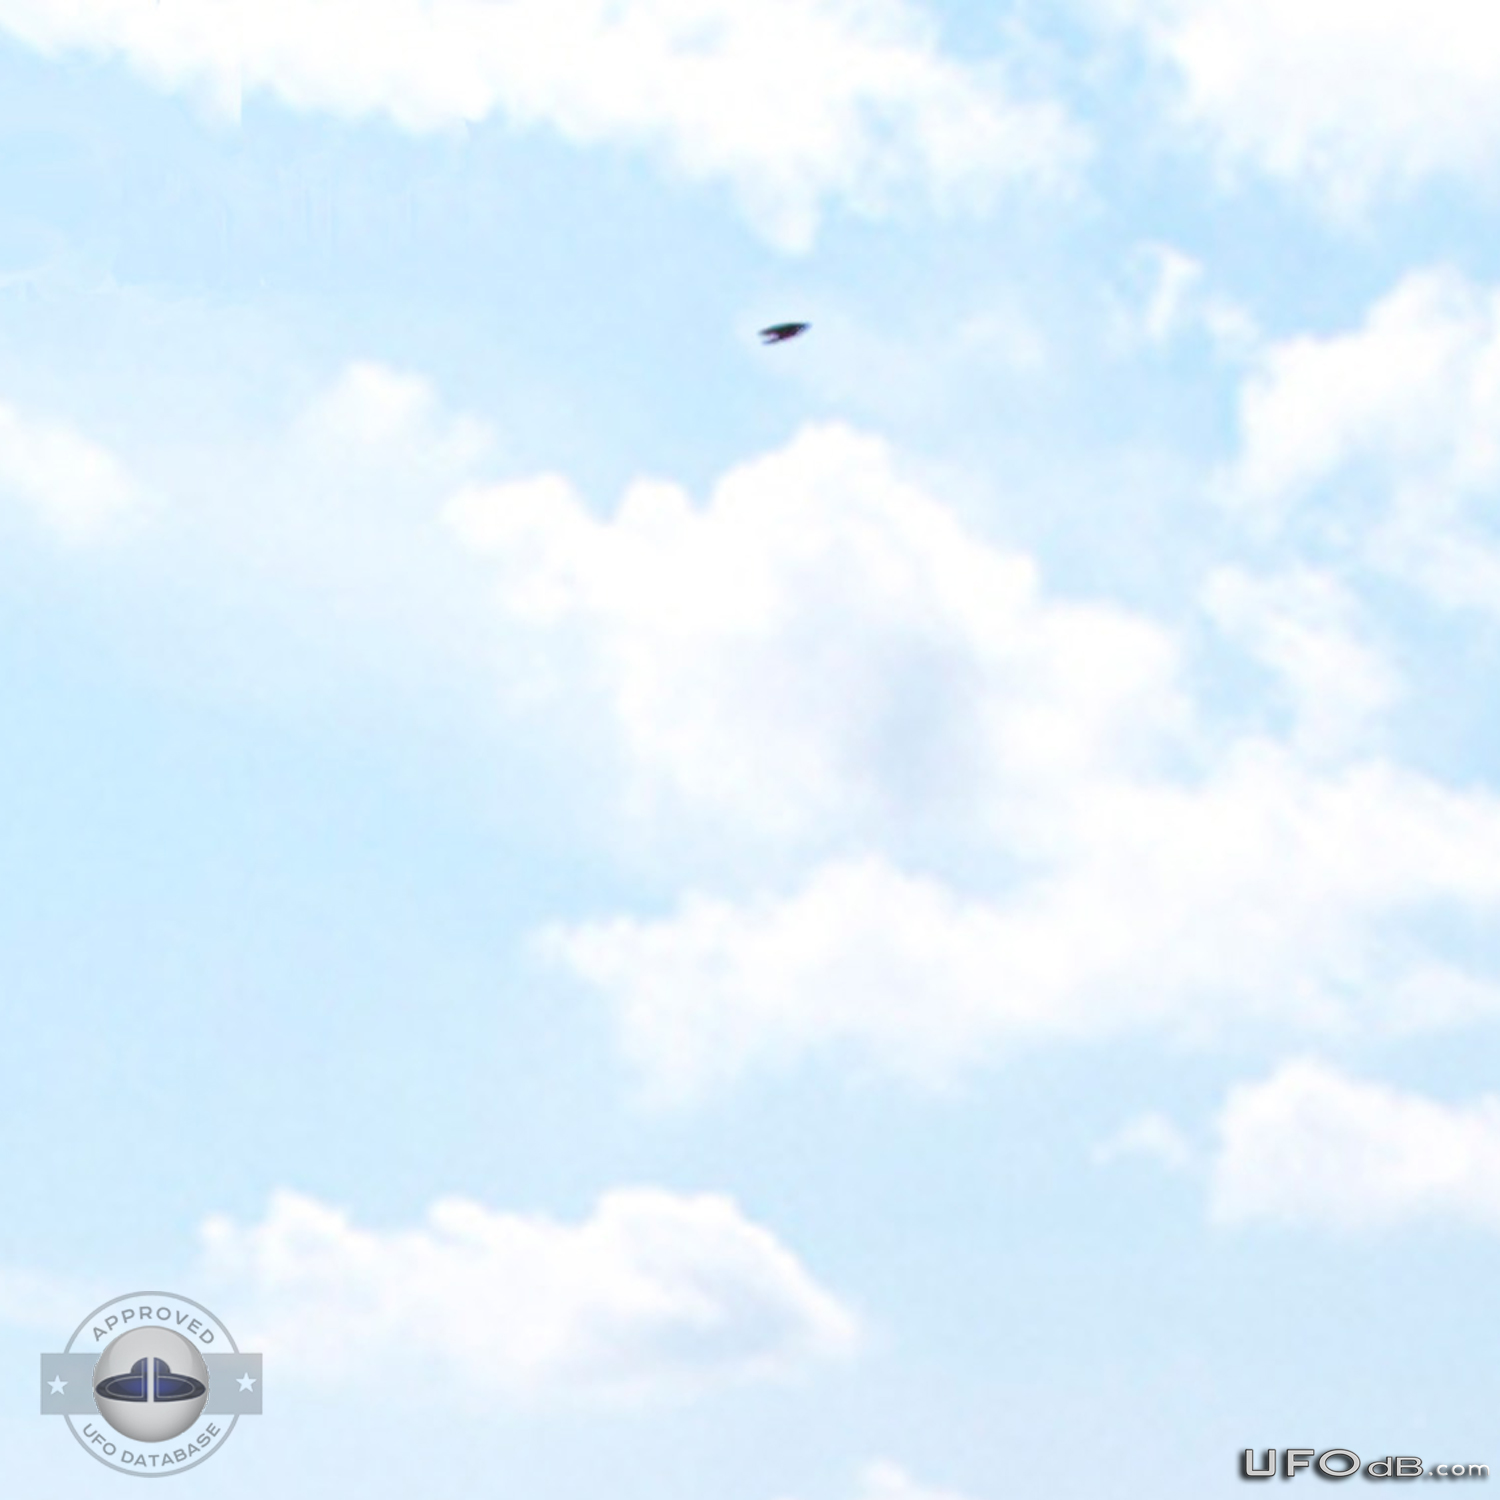 Black Boomerang UFO in the Mountains in Cali, Colombia | January 2011 UFO Picture #245-2